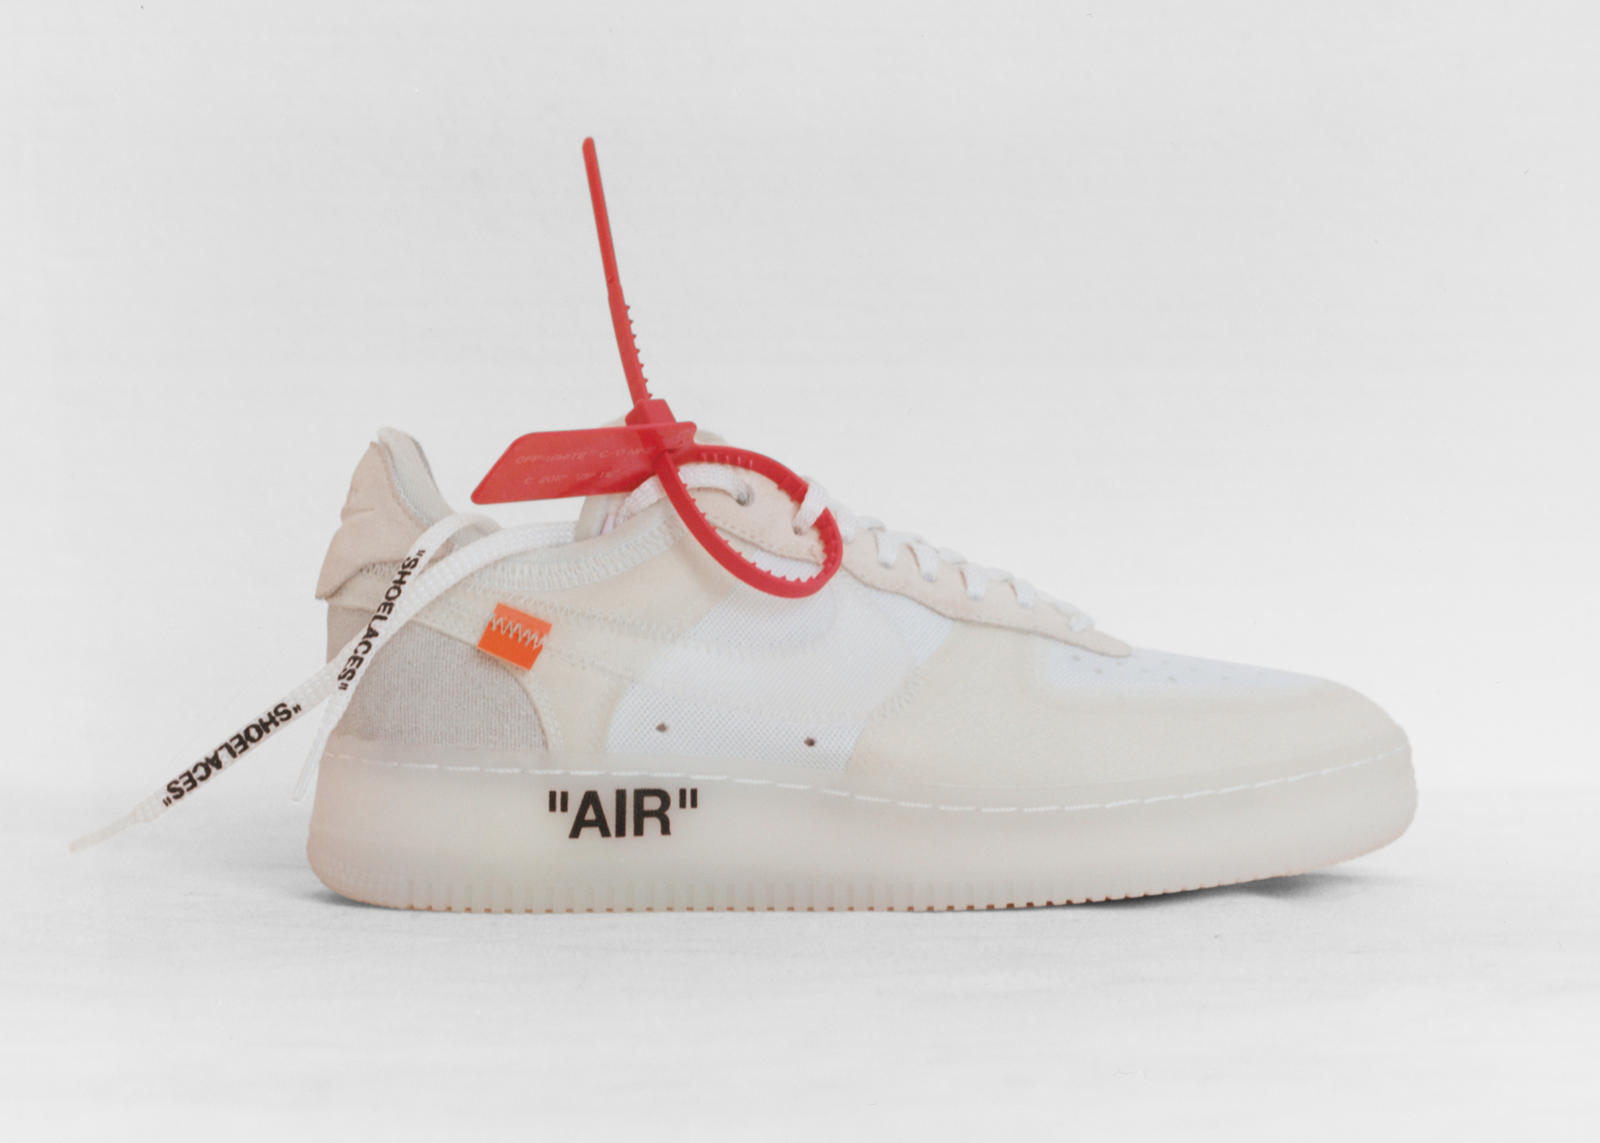 Archivo autor Destrucción A guide to Virgil Abloh's most iconic sneakers and where to buy them